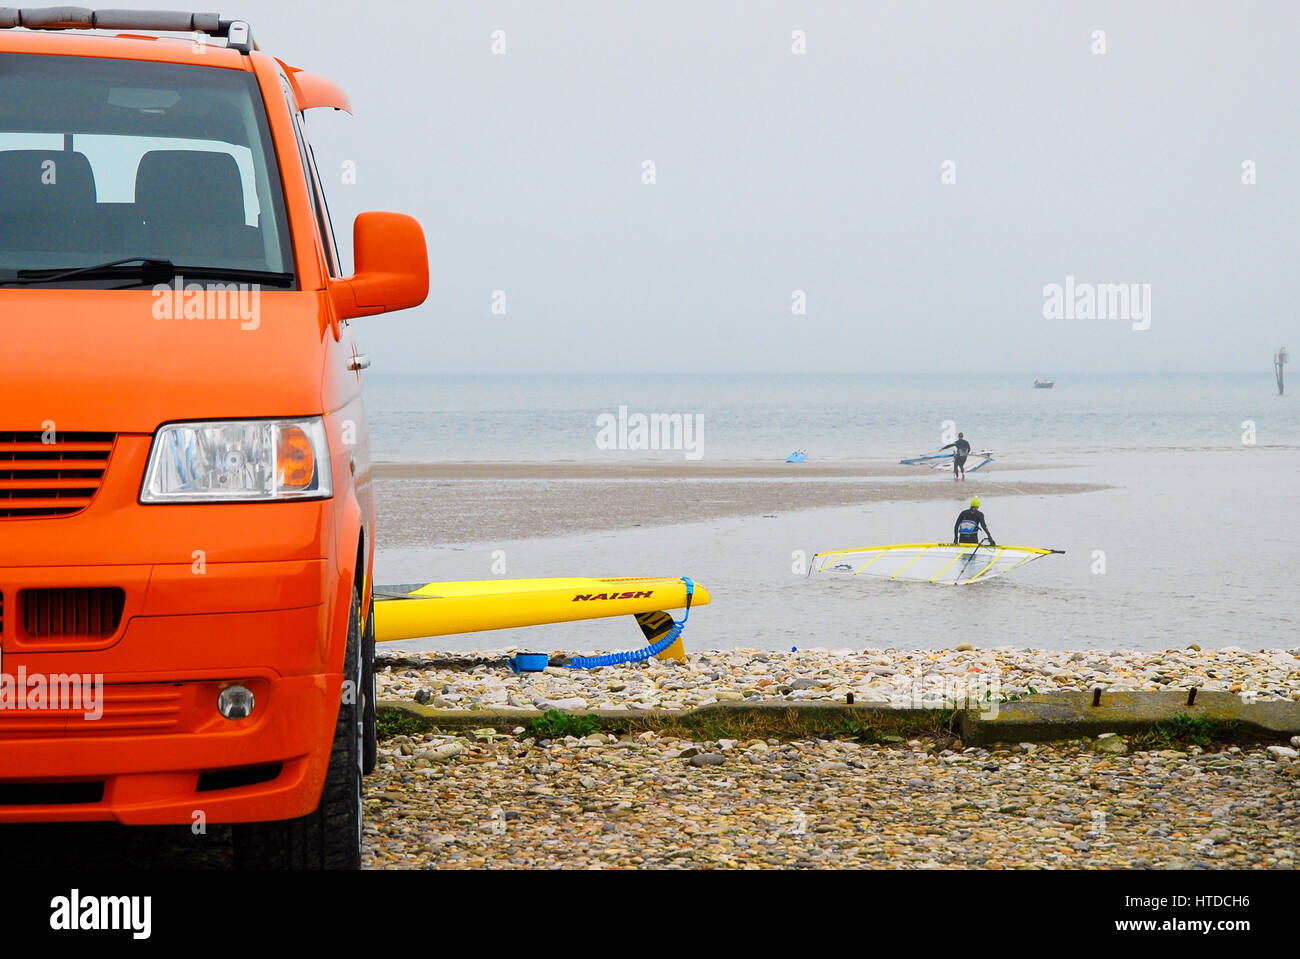 Weymouth & Portland, Dorset, 2017, VW campervan owners enjoy Portland harbour on an overcast day. Their bright-orange VW van brightens up the dull day and gives the scene a 'California surfer' look. Stock Photo